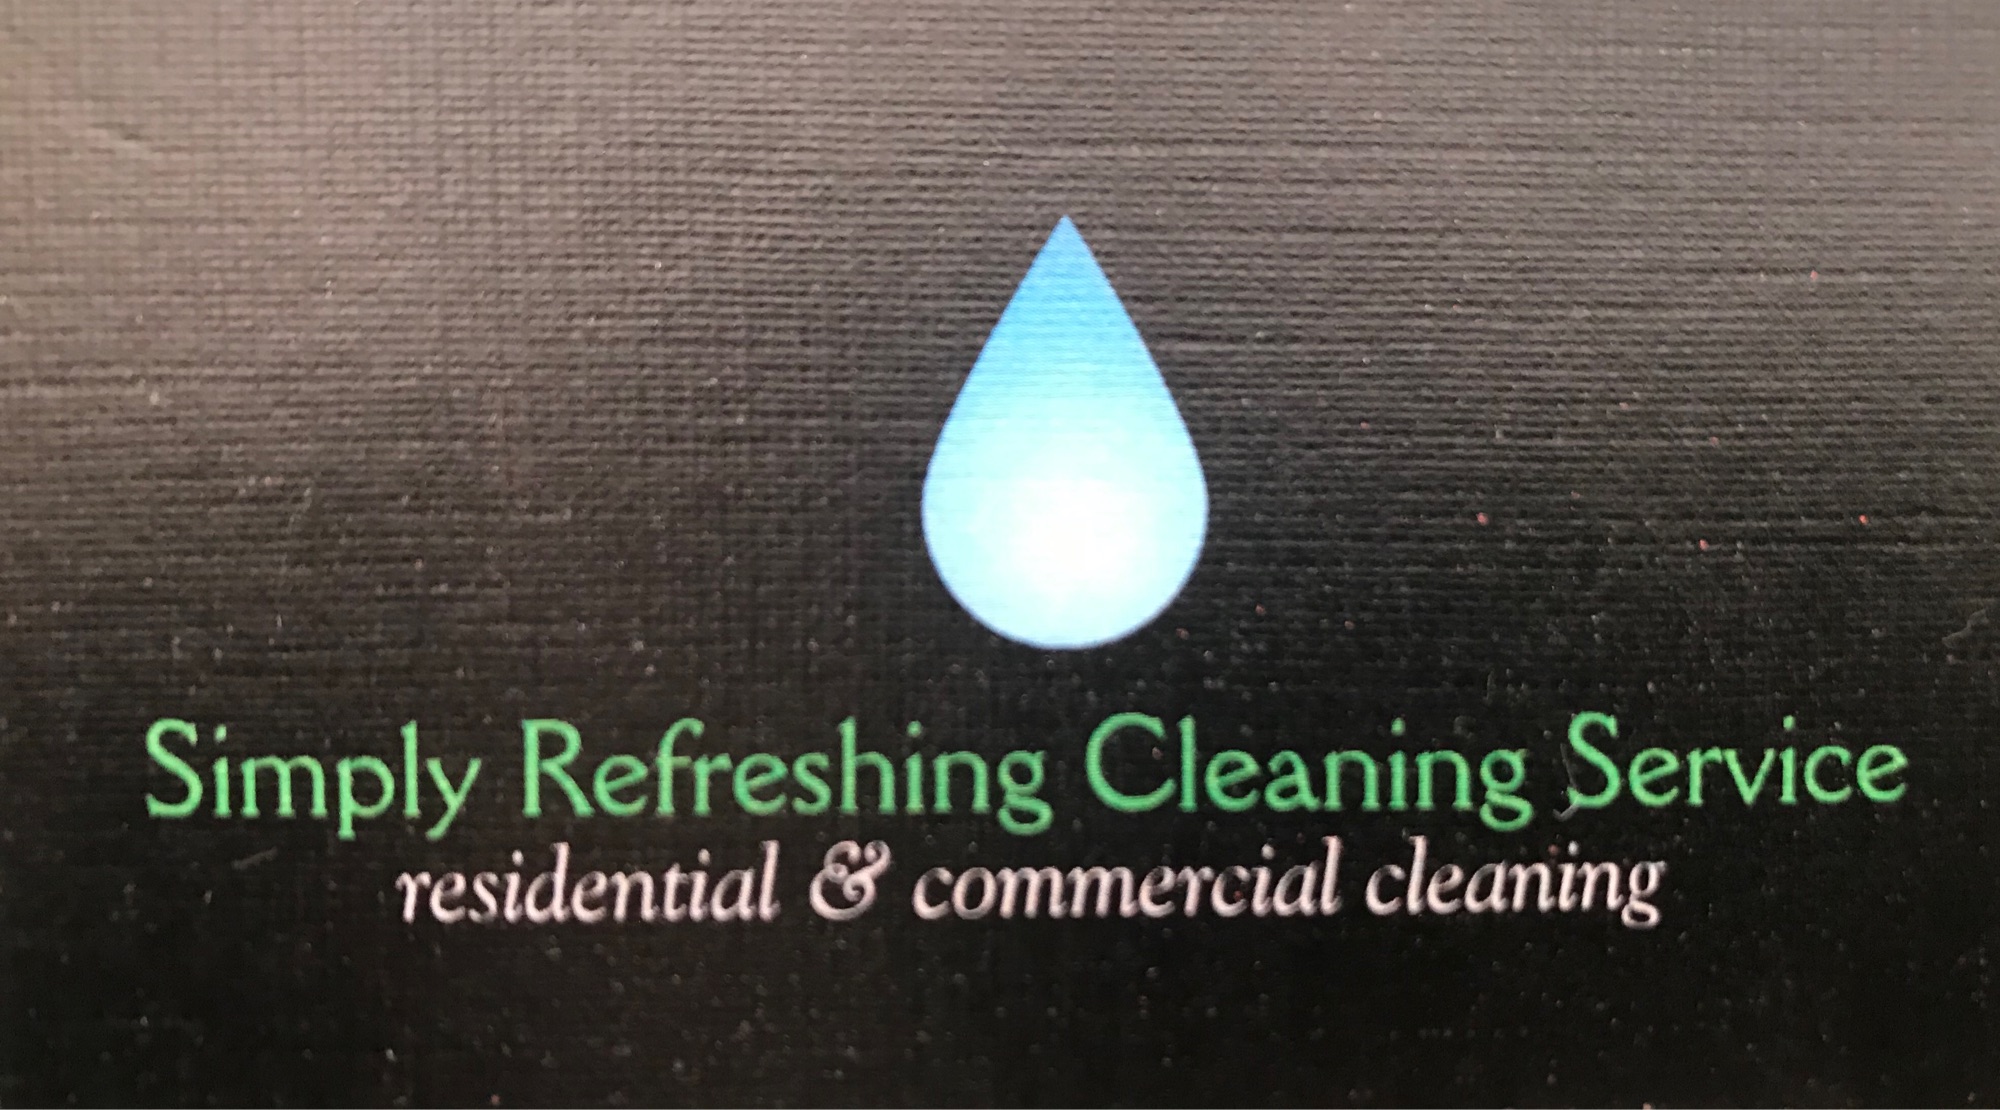 Simply Refreshing Cleaning Service Logo